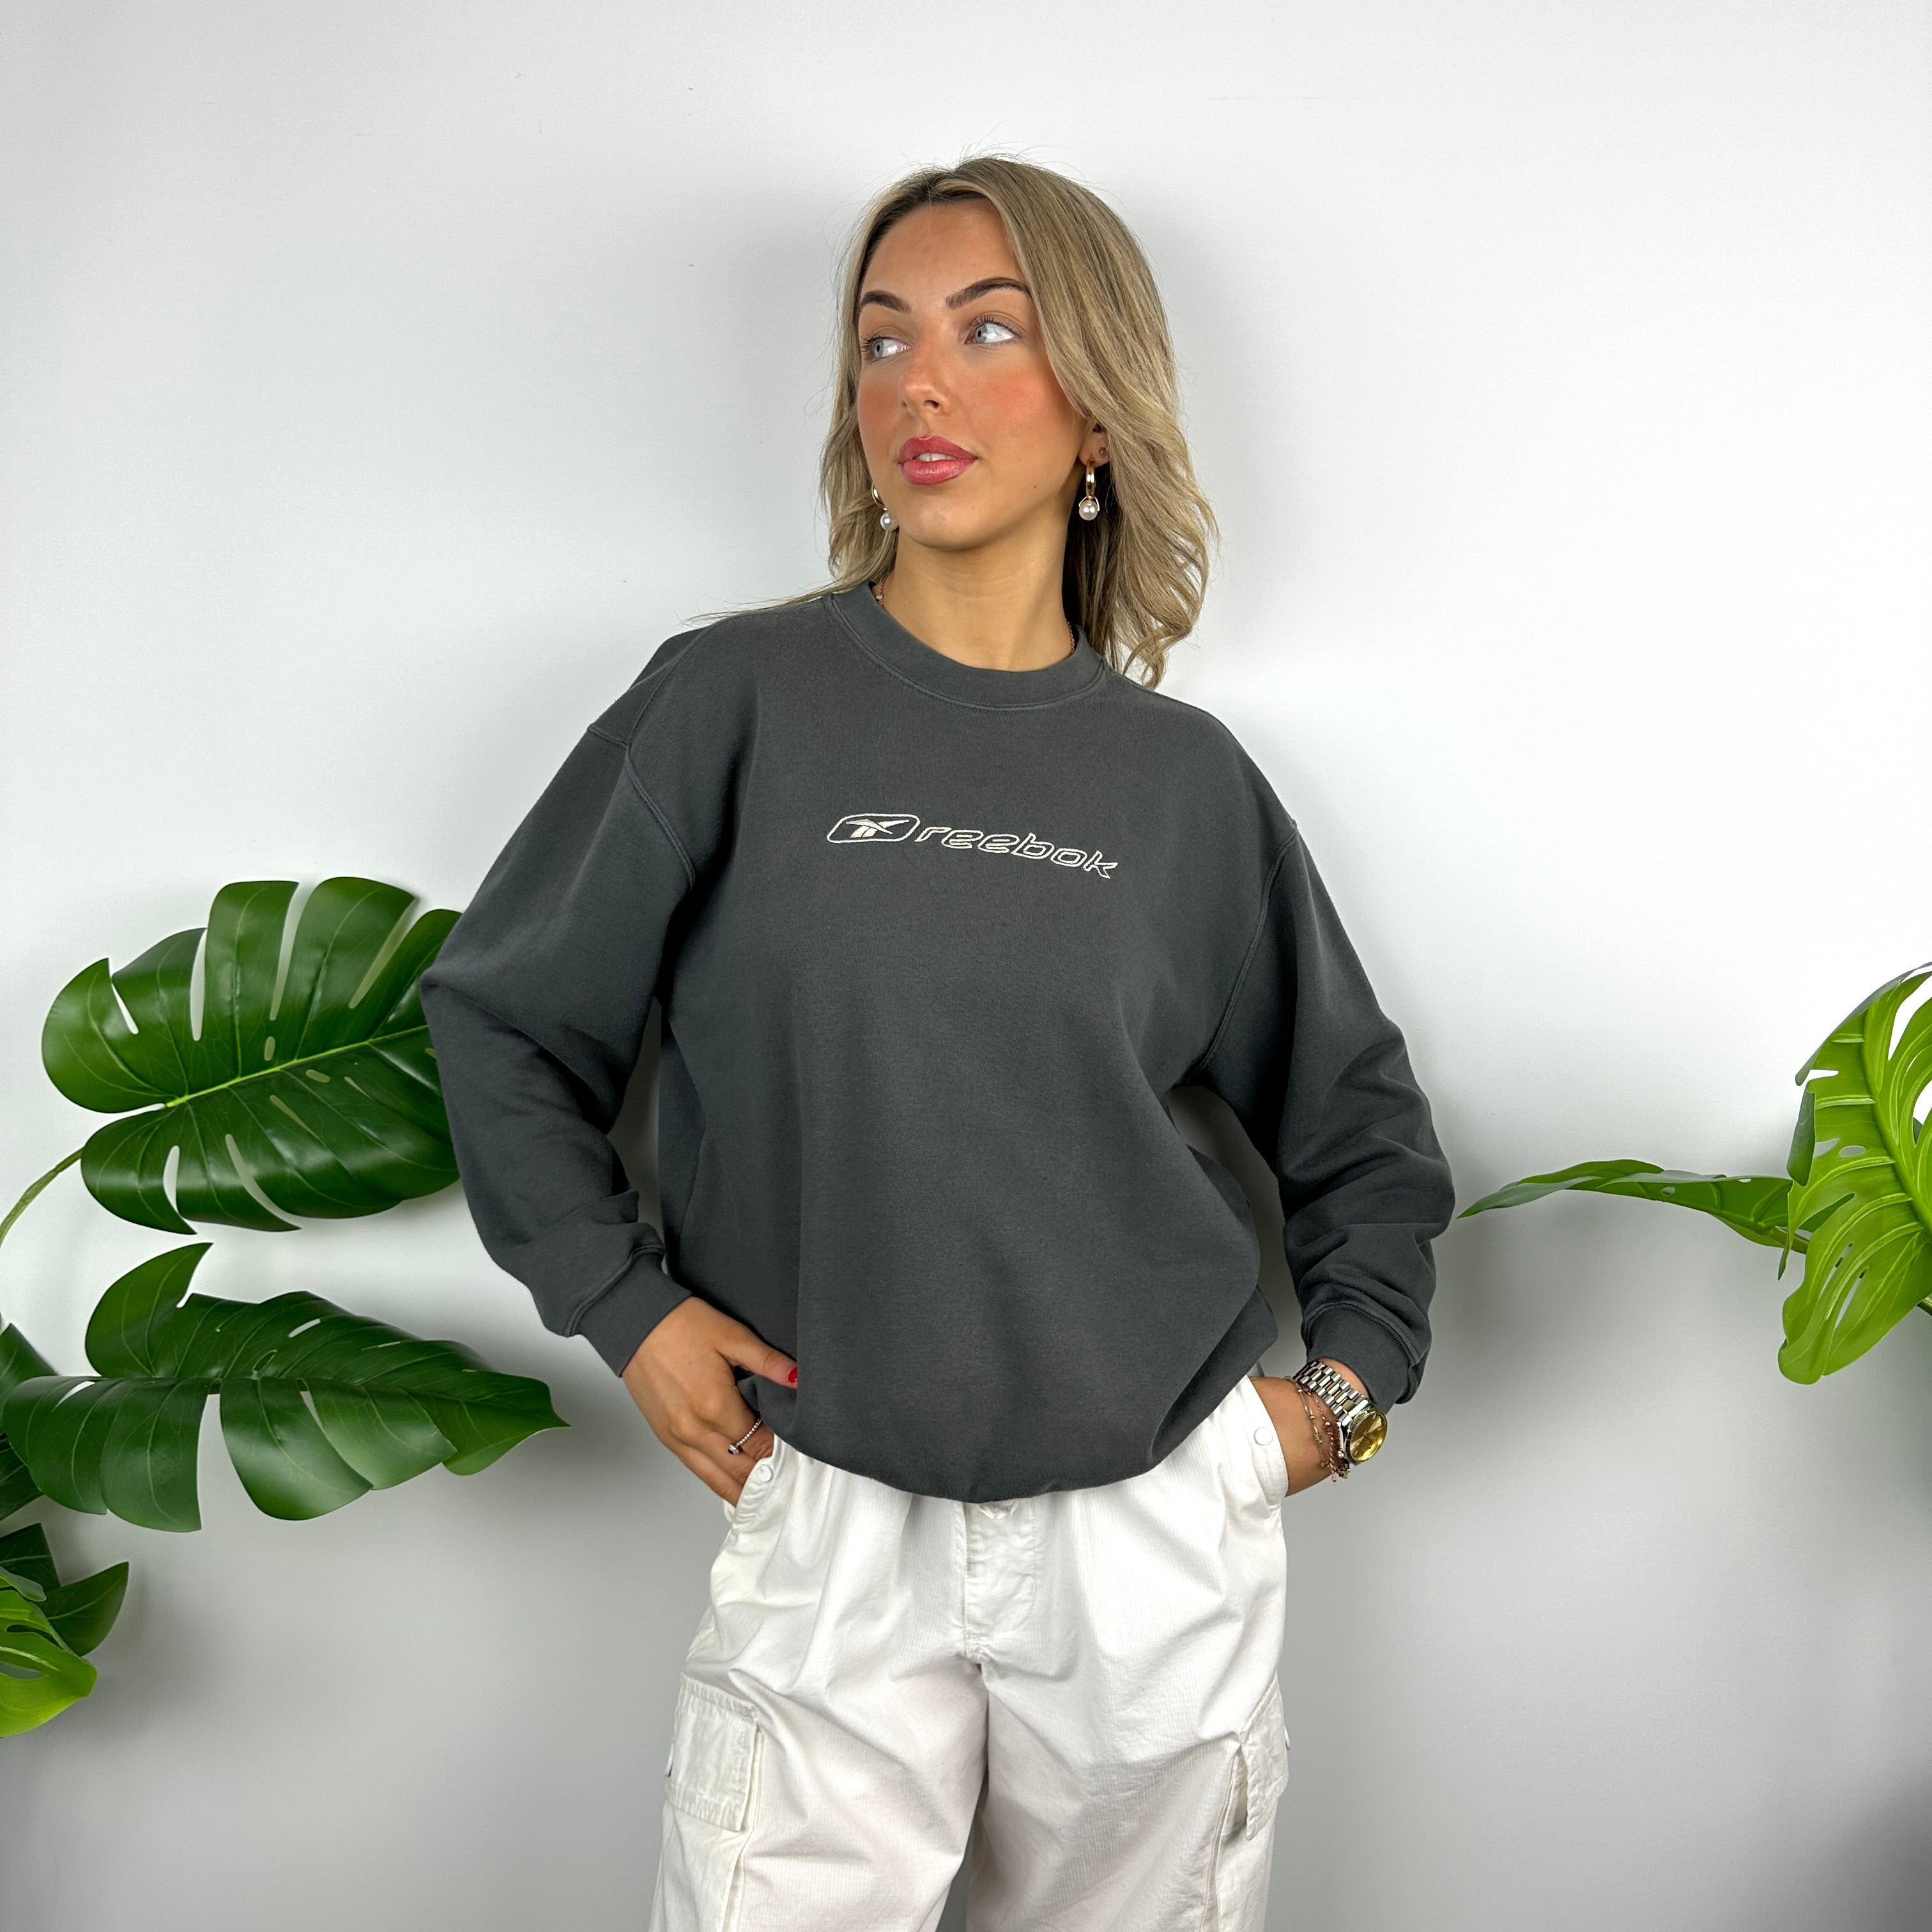 Reebok Grey Embroidered Spell Out Sweatshirt (S)